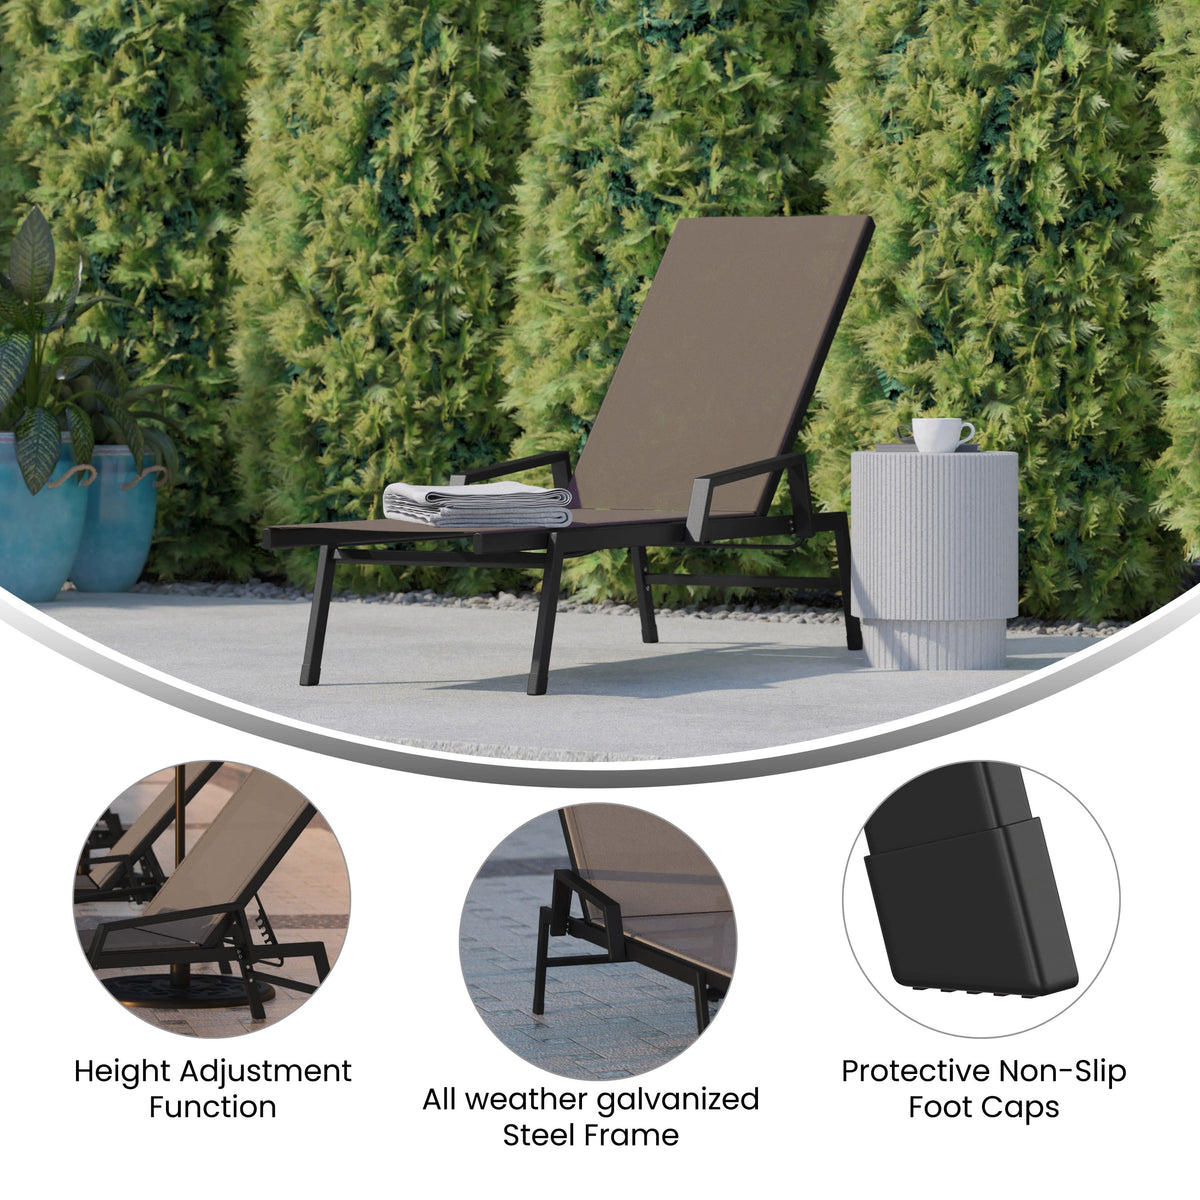 Brown |#| All-Weather Textilene Adjustable Chaise Lounge Chair with Arms - Black/Brown